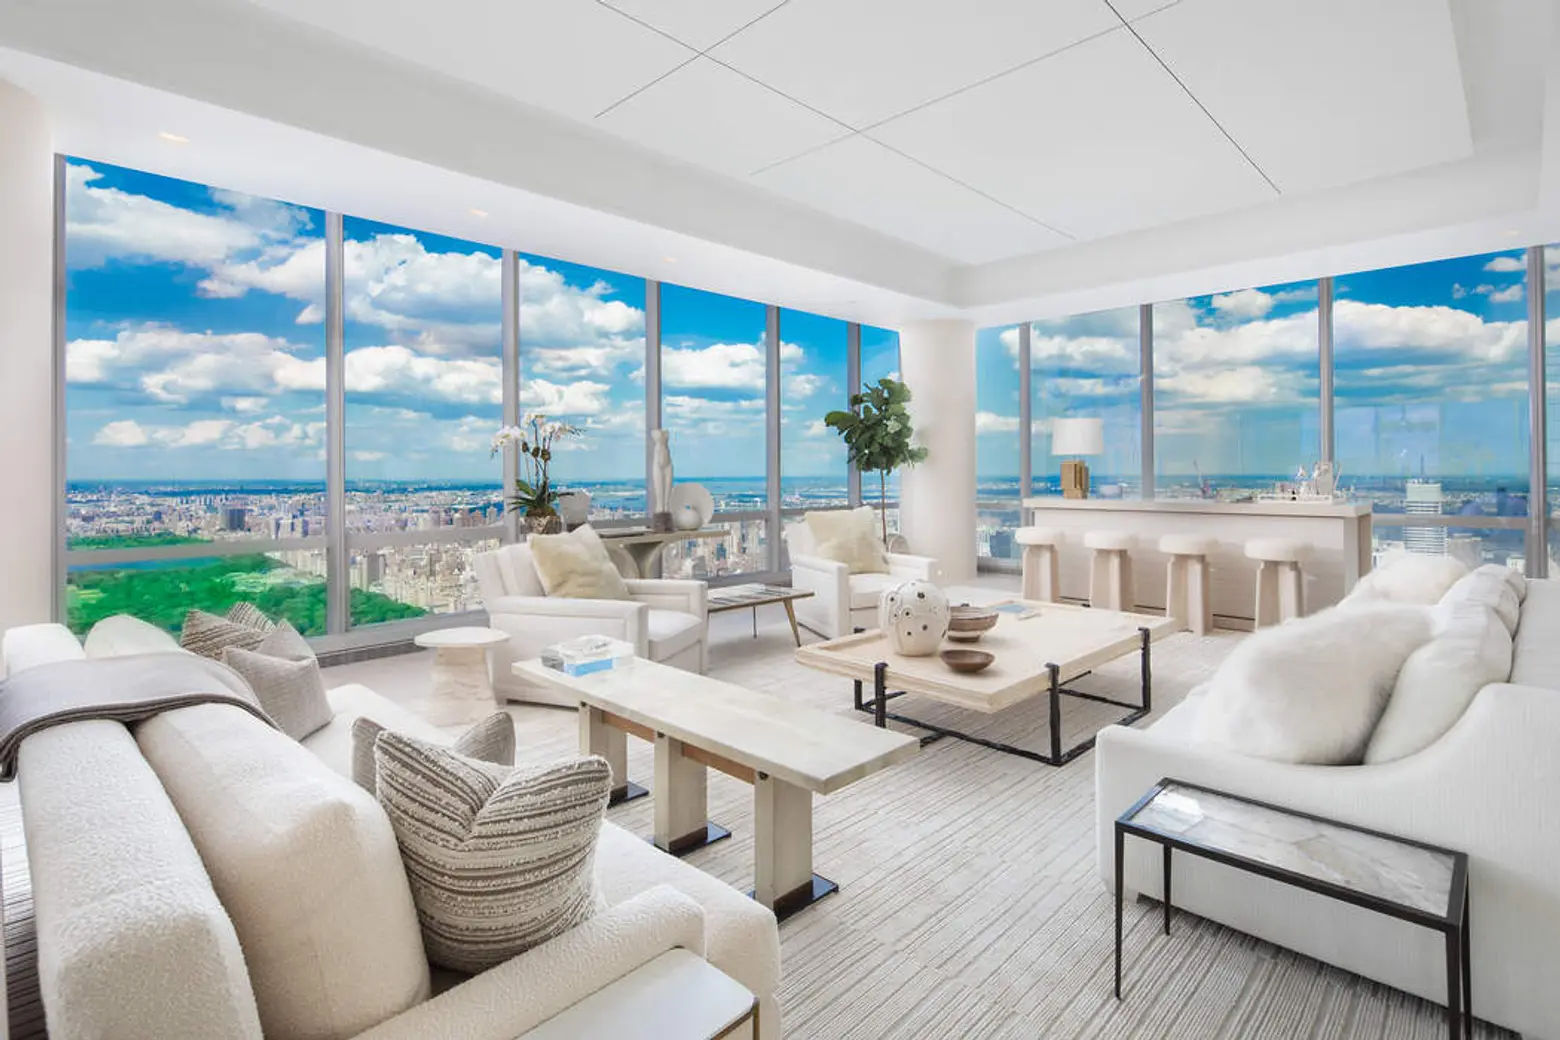 85th floor unit at One57 gets an $11M price chop, now listed at $59M